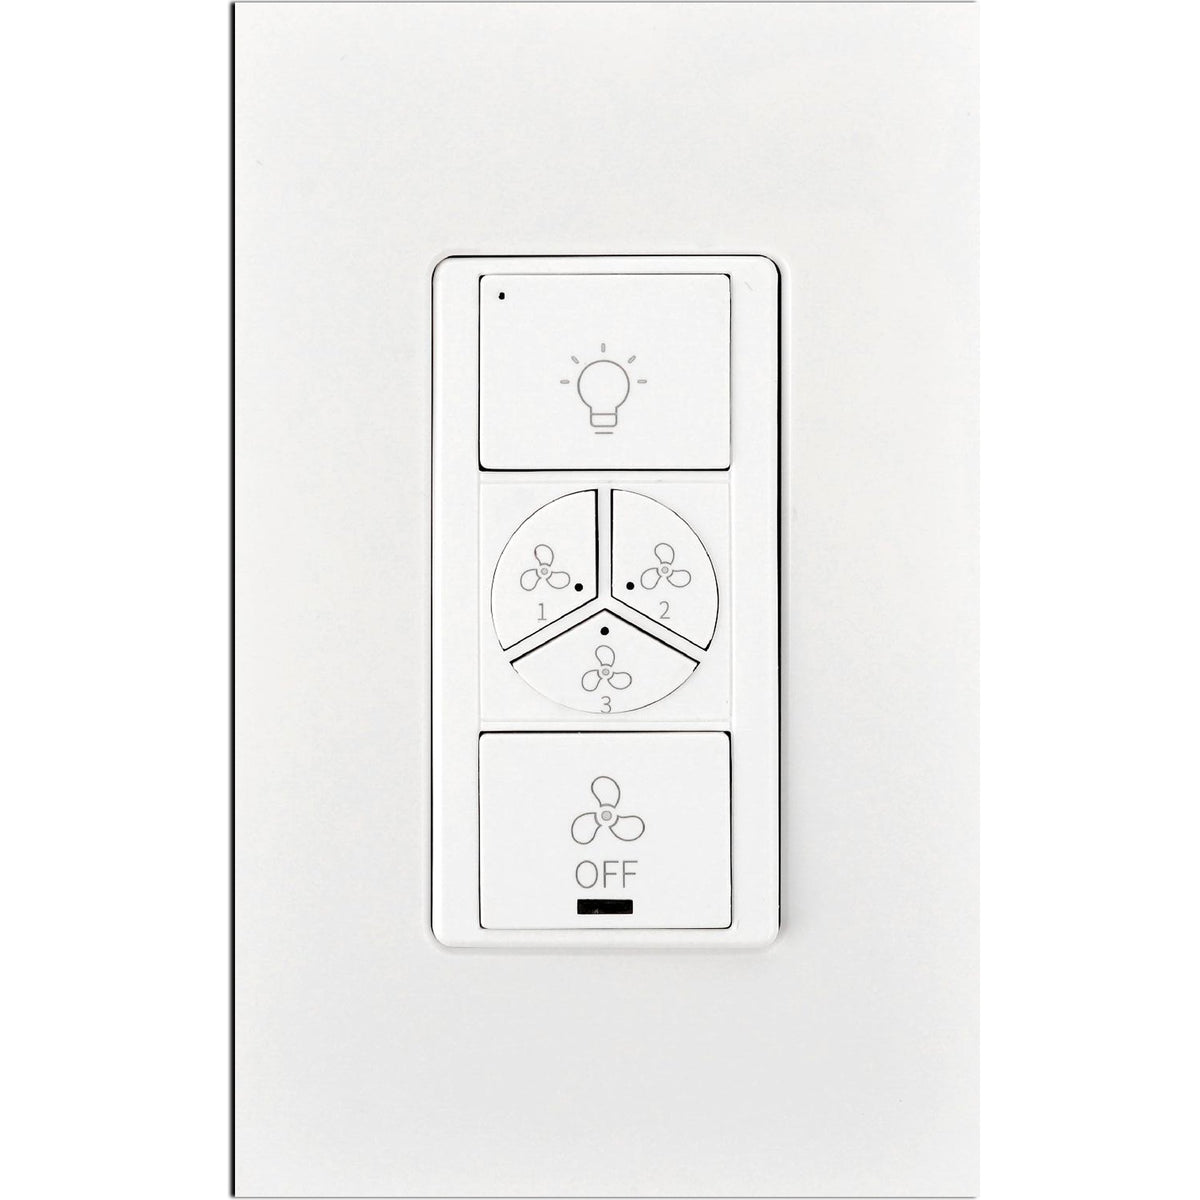 Pilot Smart Wall Switch For Ceiling Fans(1-Gang), Google Assistant, and Siri Shortcuts, Works with Amazon Alexa